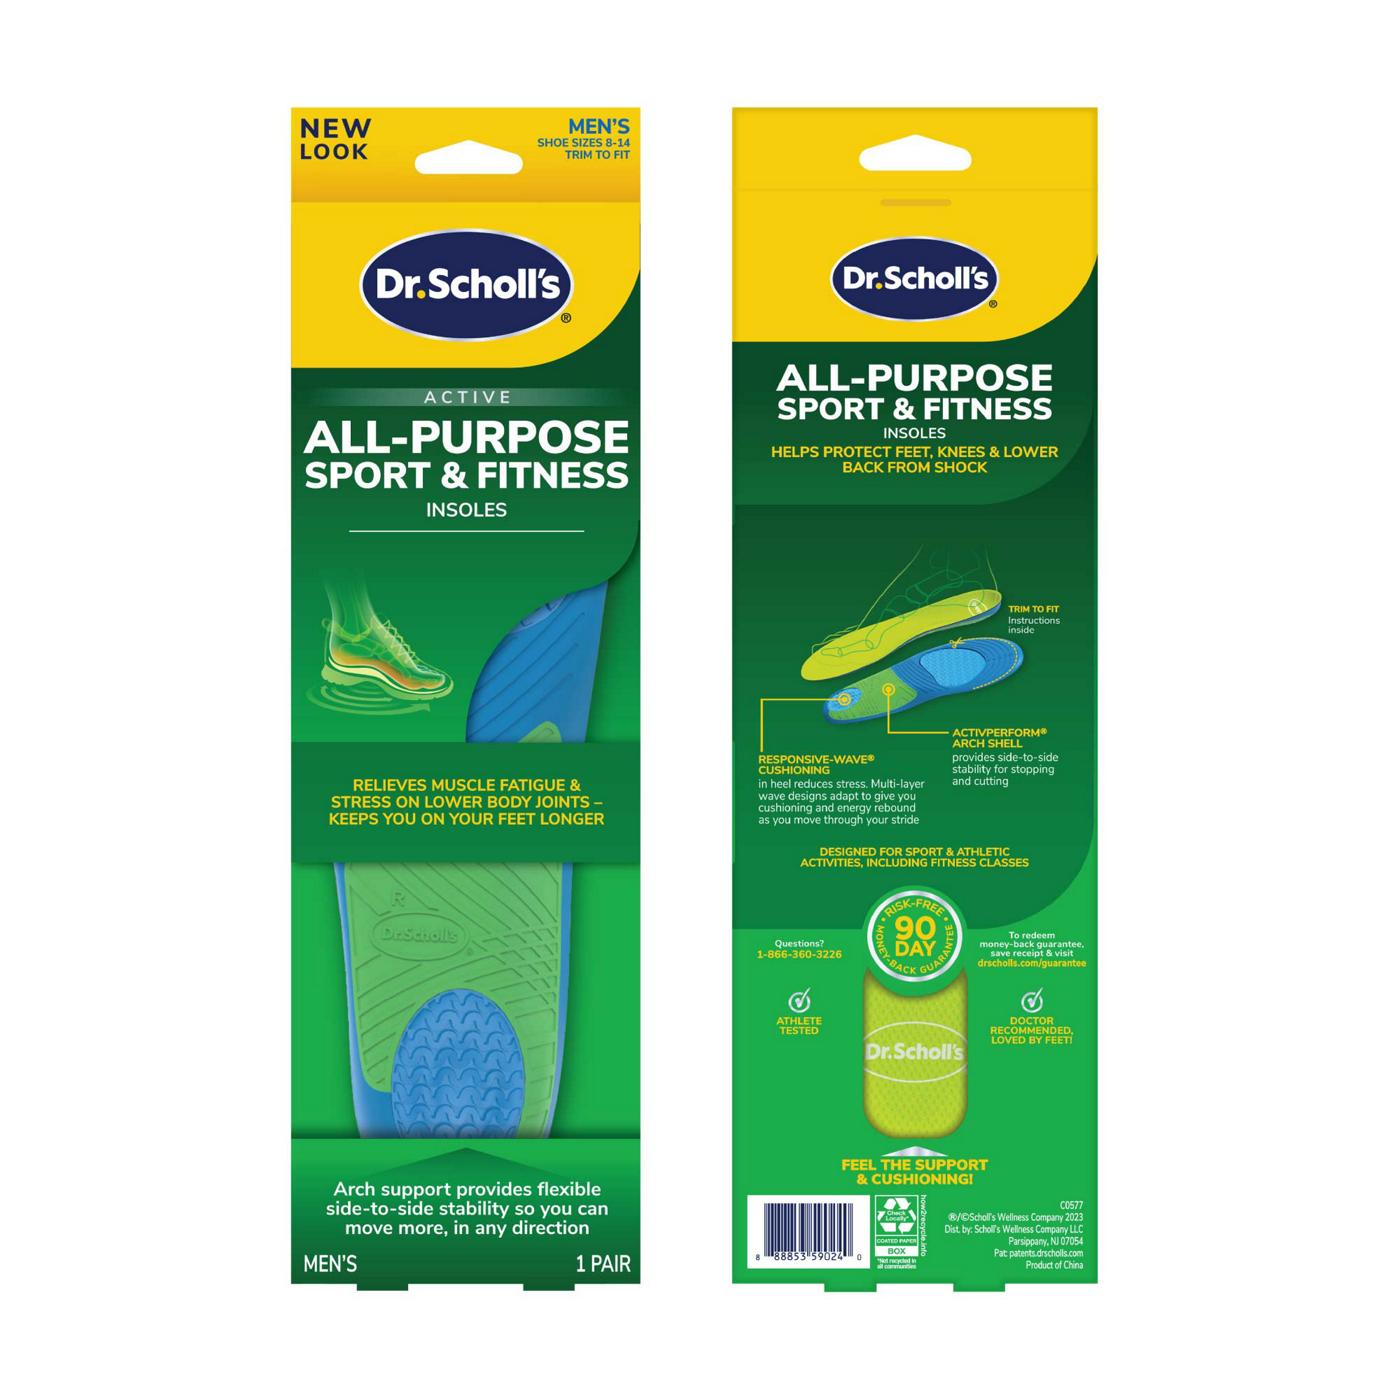 Dr. Scholl's All-Purpose Sport & Fitness Comfort Insoles, Men's, 1 Pair, Trim to Fit; image 4 of 10